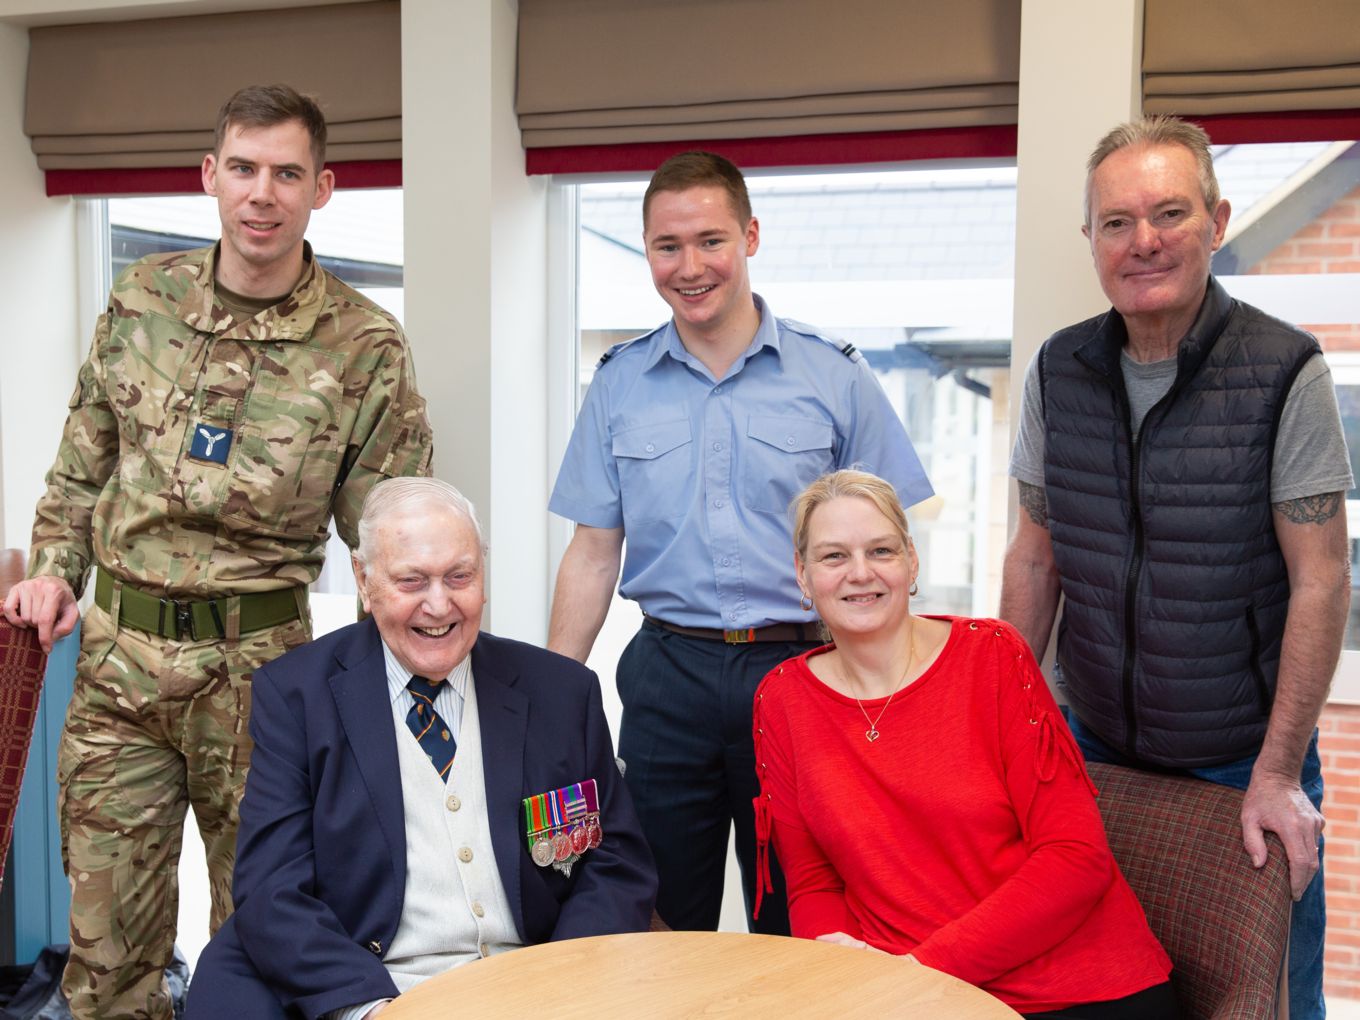 Mr James Fay (seated left) and family with Flying Officer Ryan Johnson (standing centre)